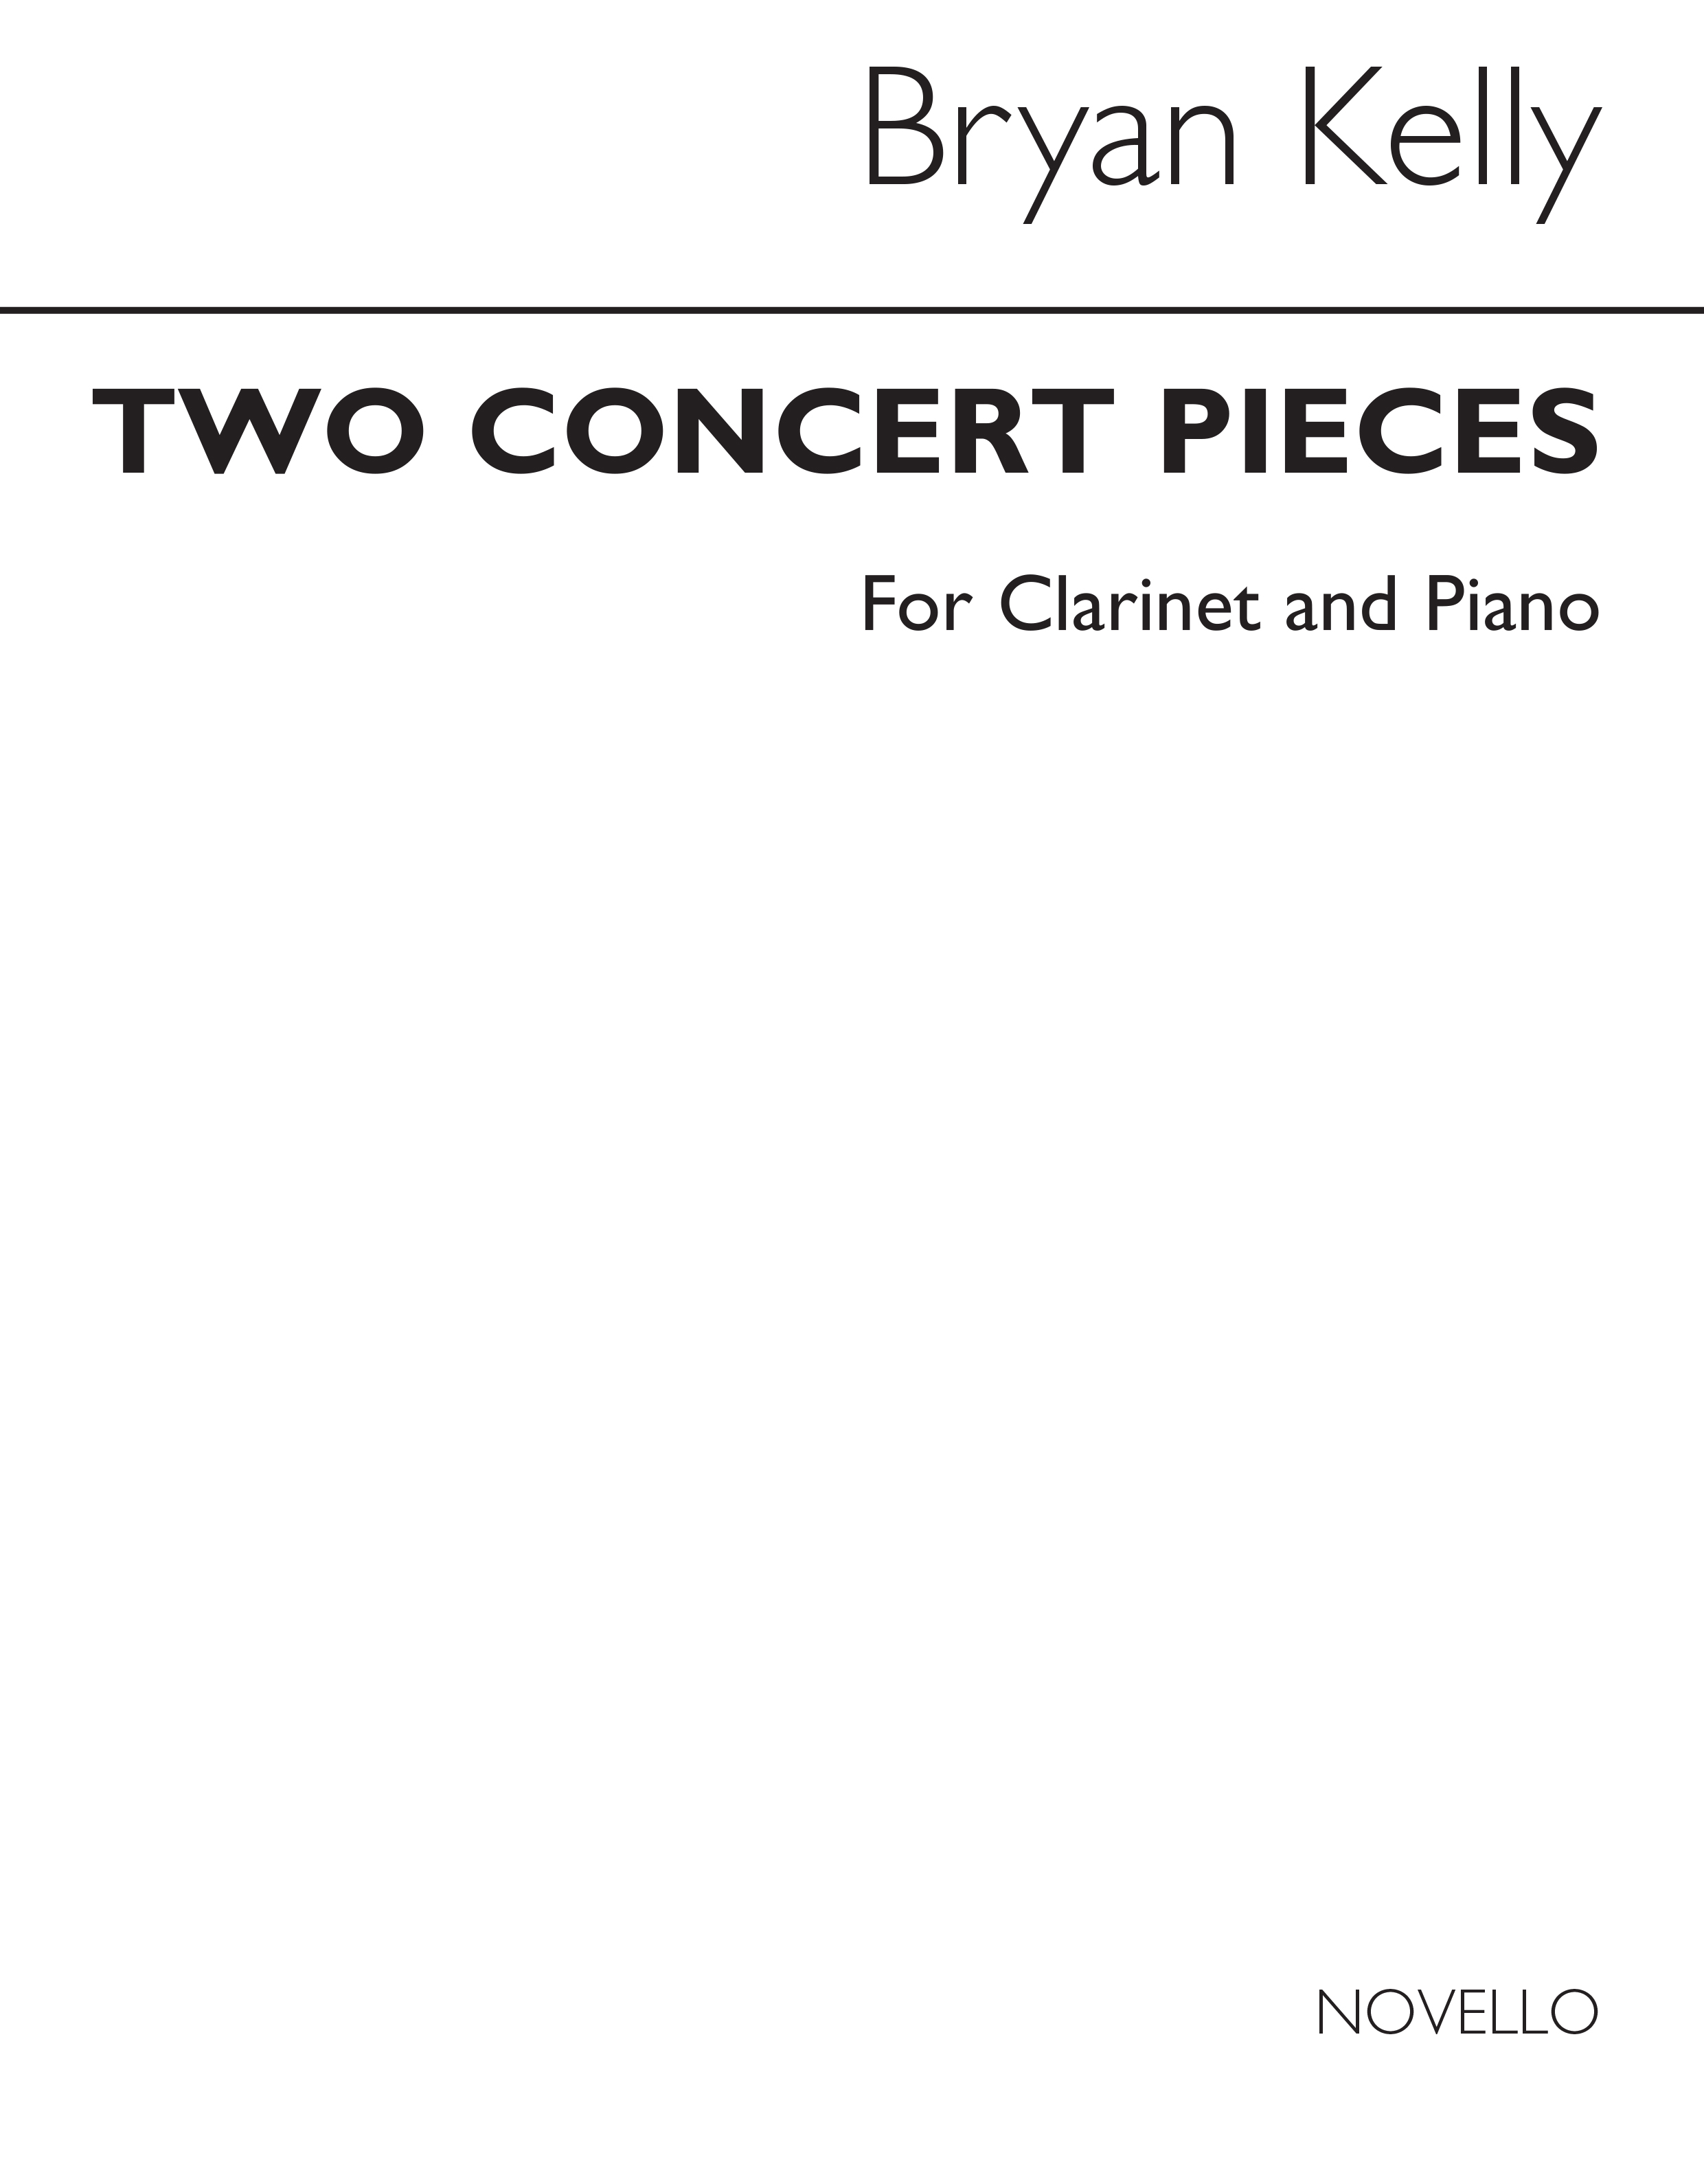 Bryan Kelly: Two Concert Pieces (Score and Parts)